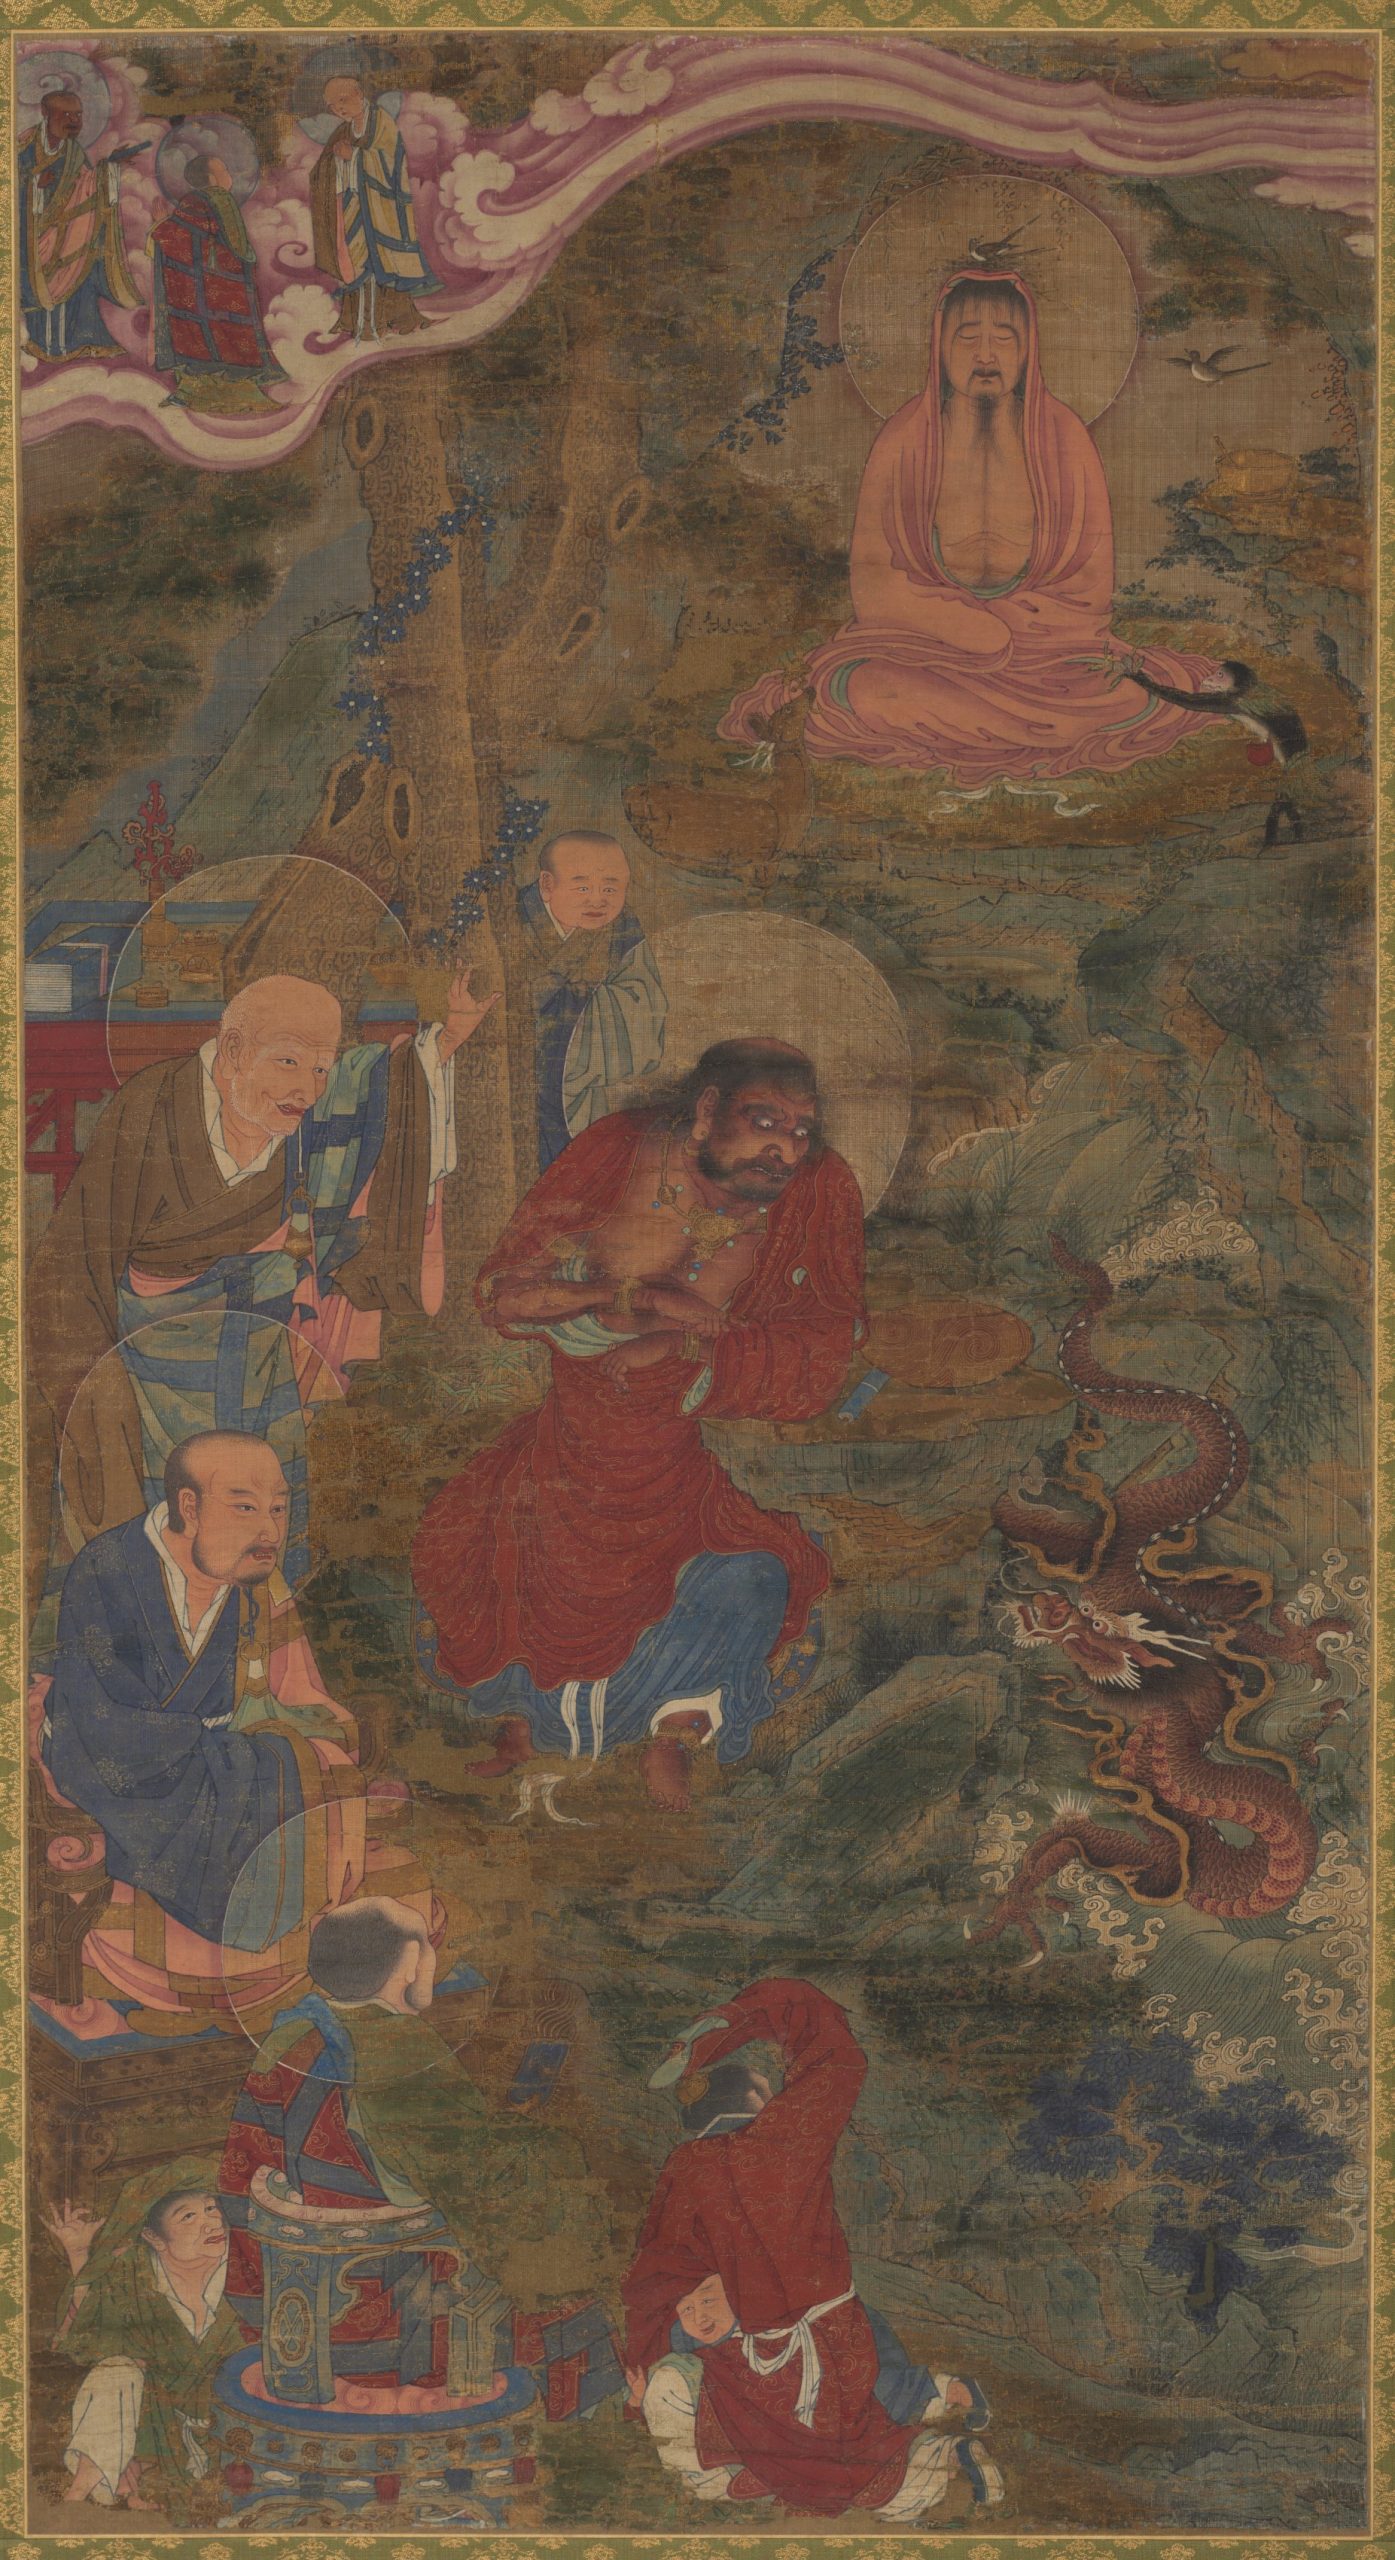 A series of figures on the far left side of the images look towards a dragon on the right side of the image.